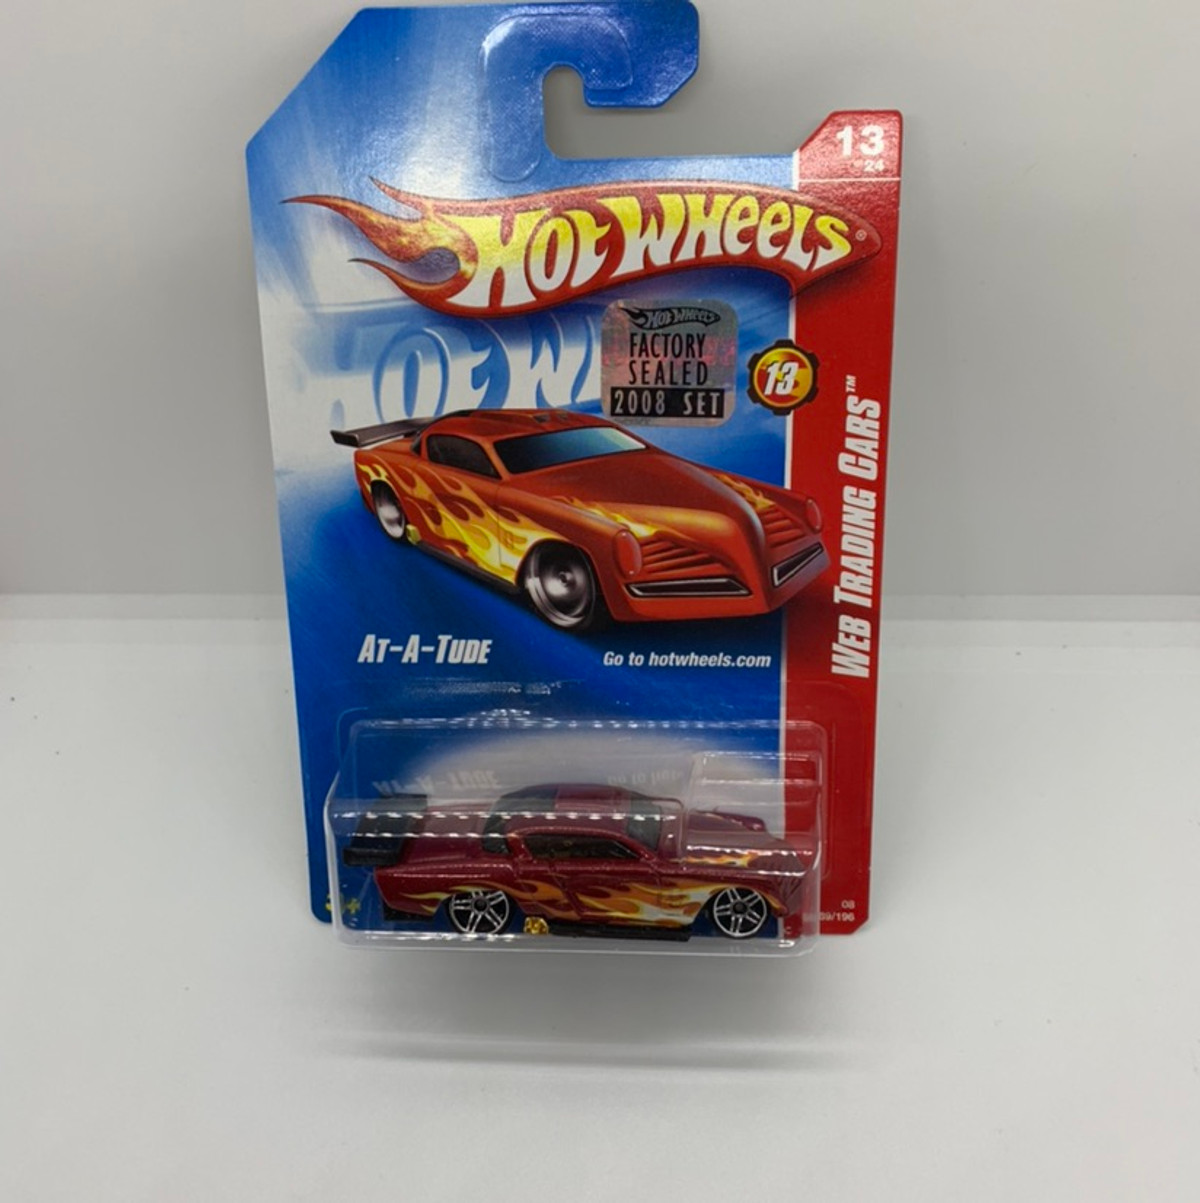 2008 Hot wheels AT-A-Tude Red Version With Factory Set Sticker 